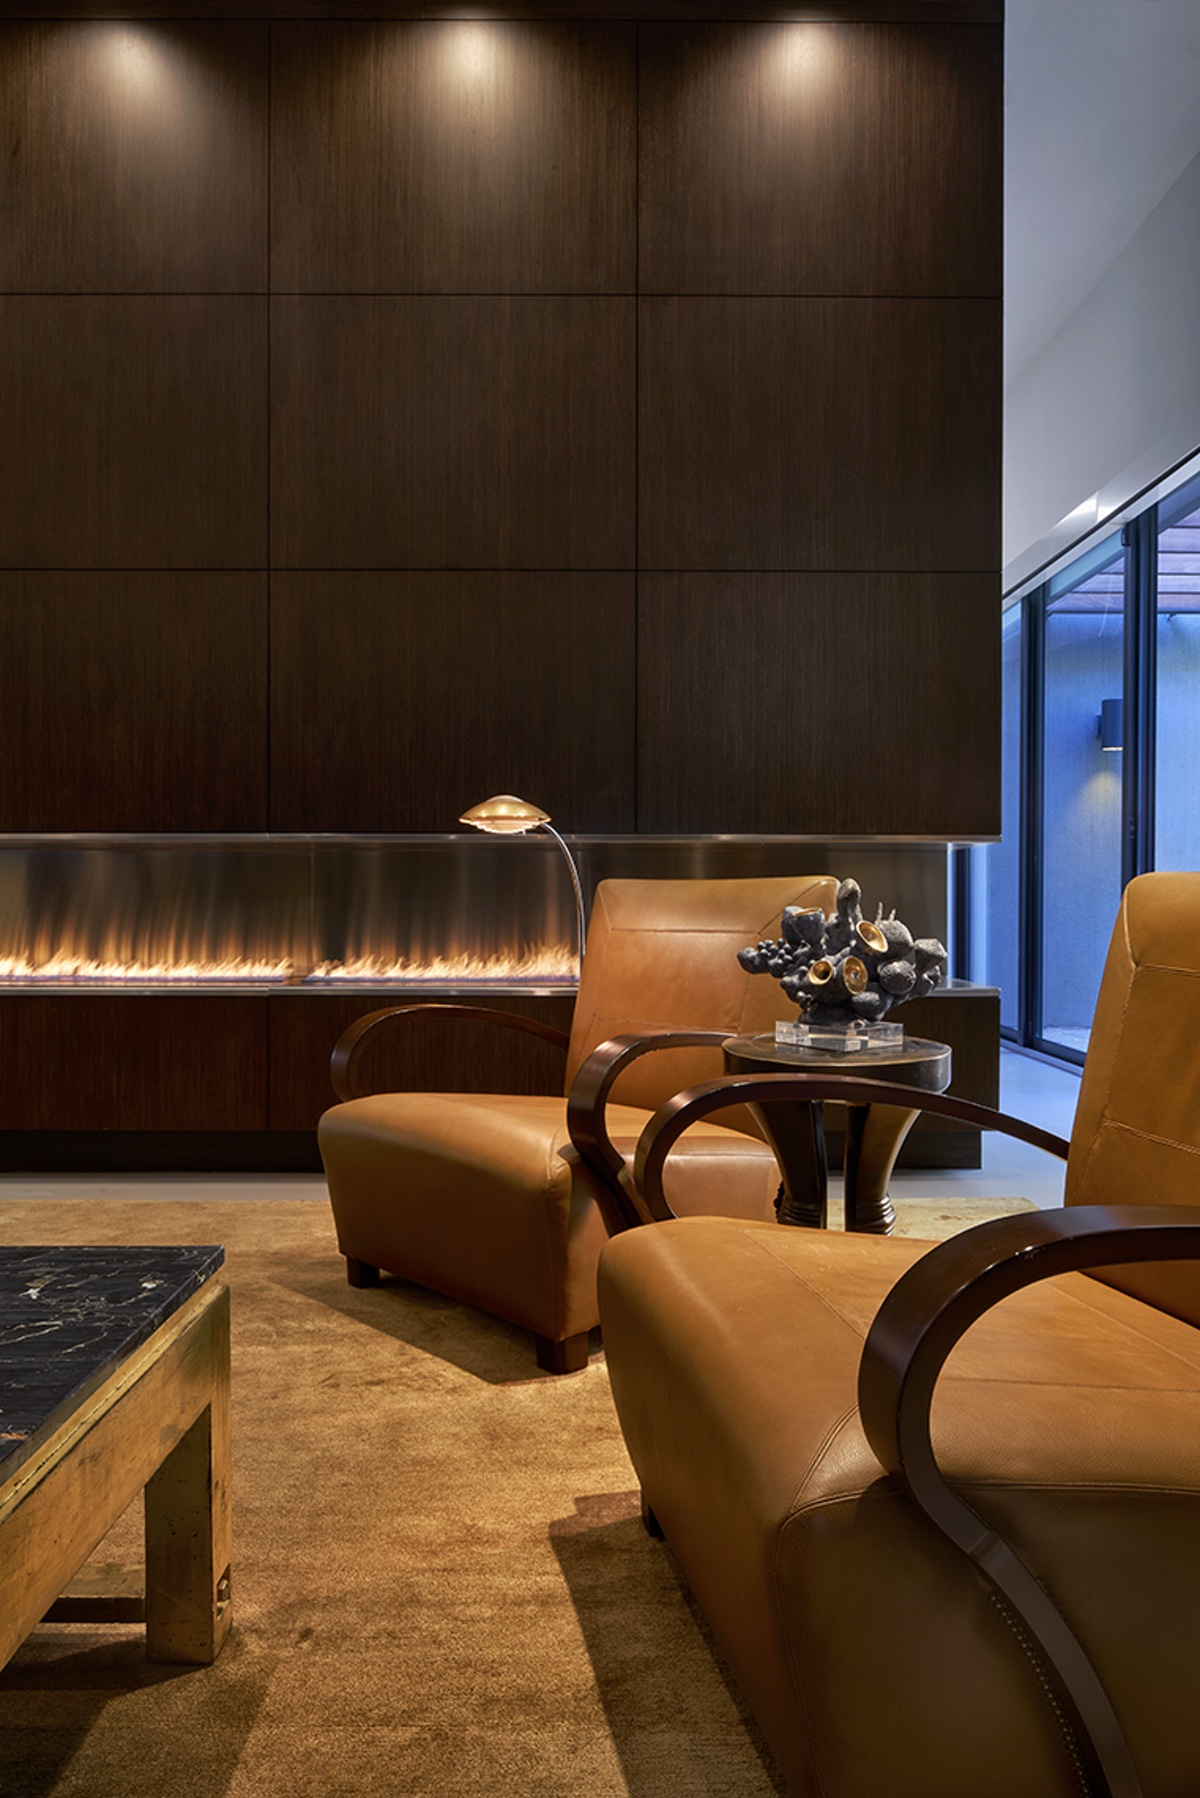 Leather lounge chairs in front of fireplace